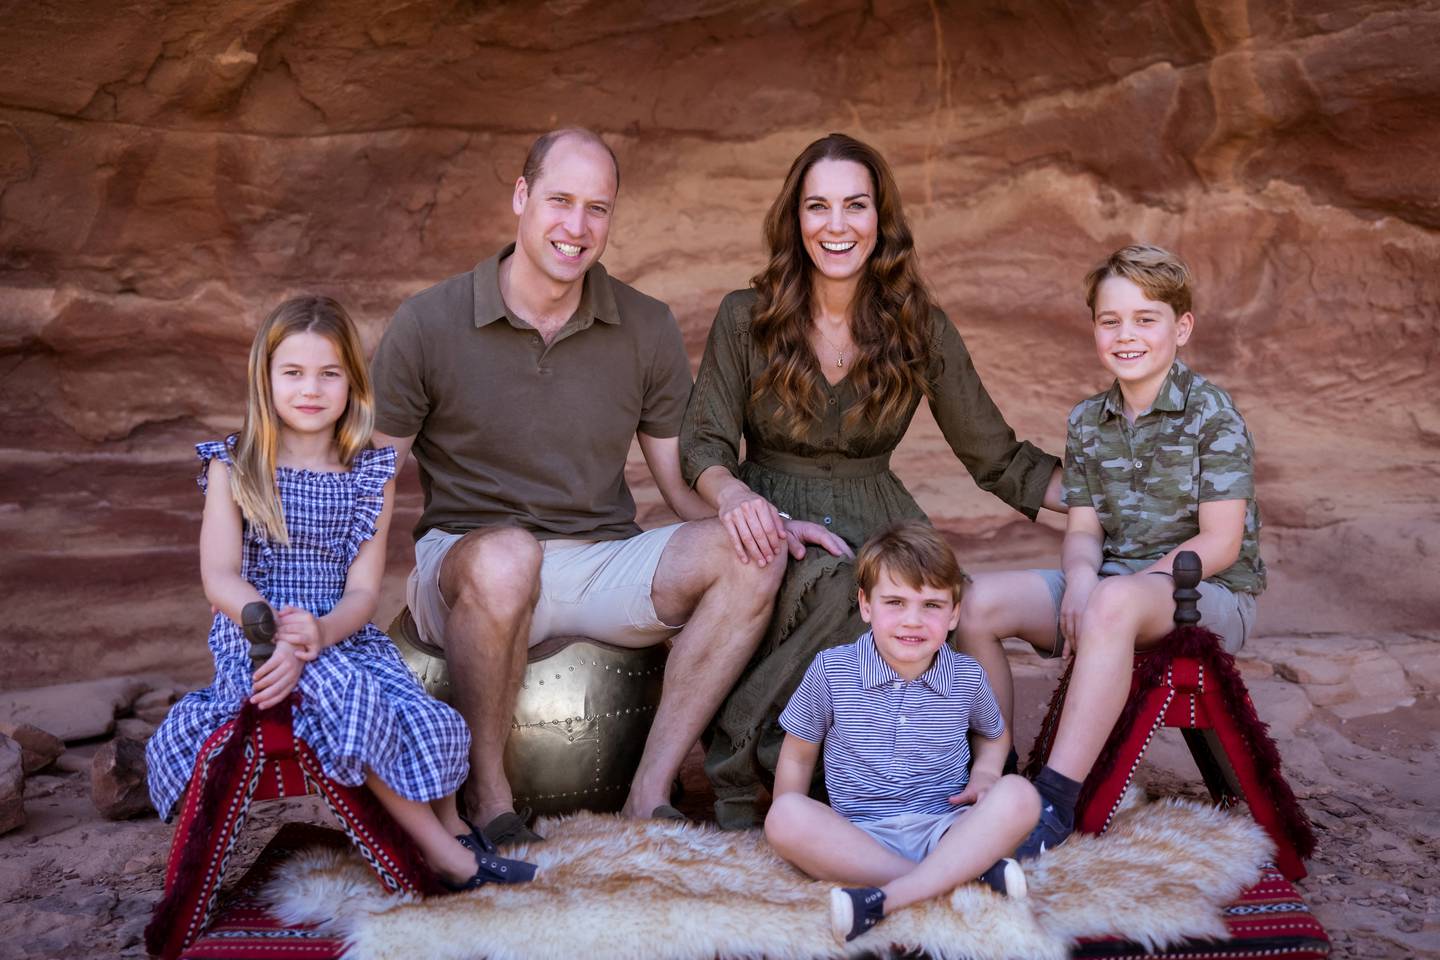 The royal Christmas card for 2021 was also taken in Jordan. Reuters